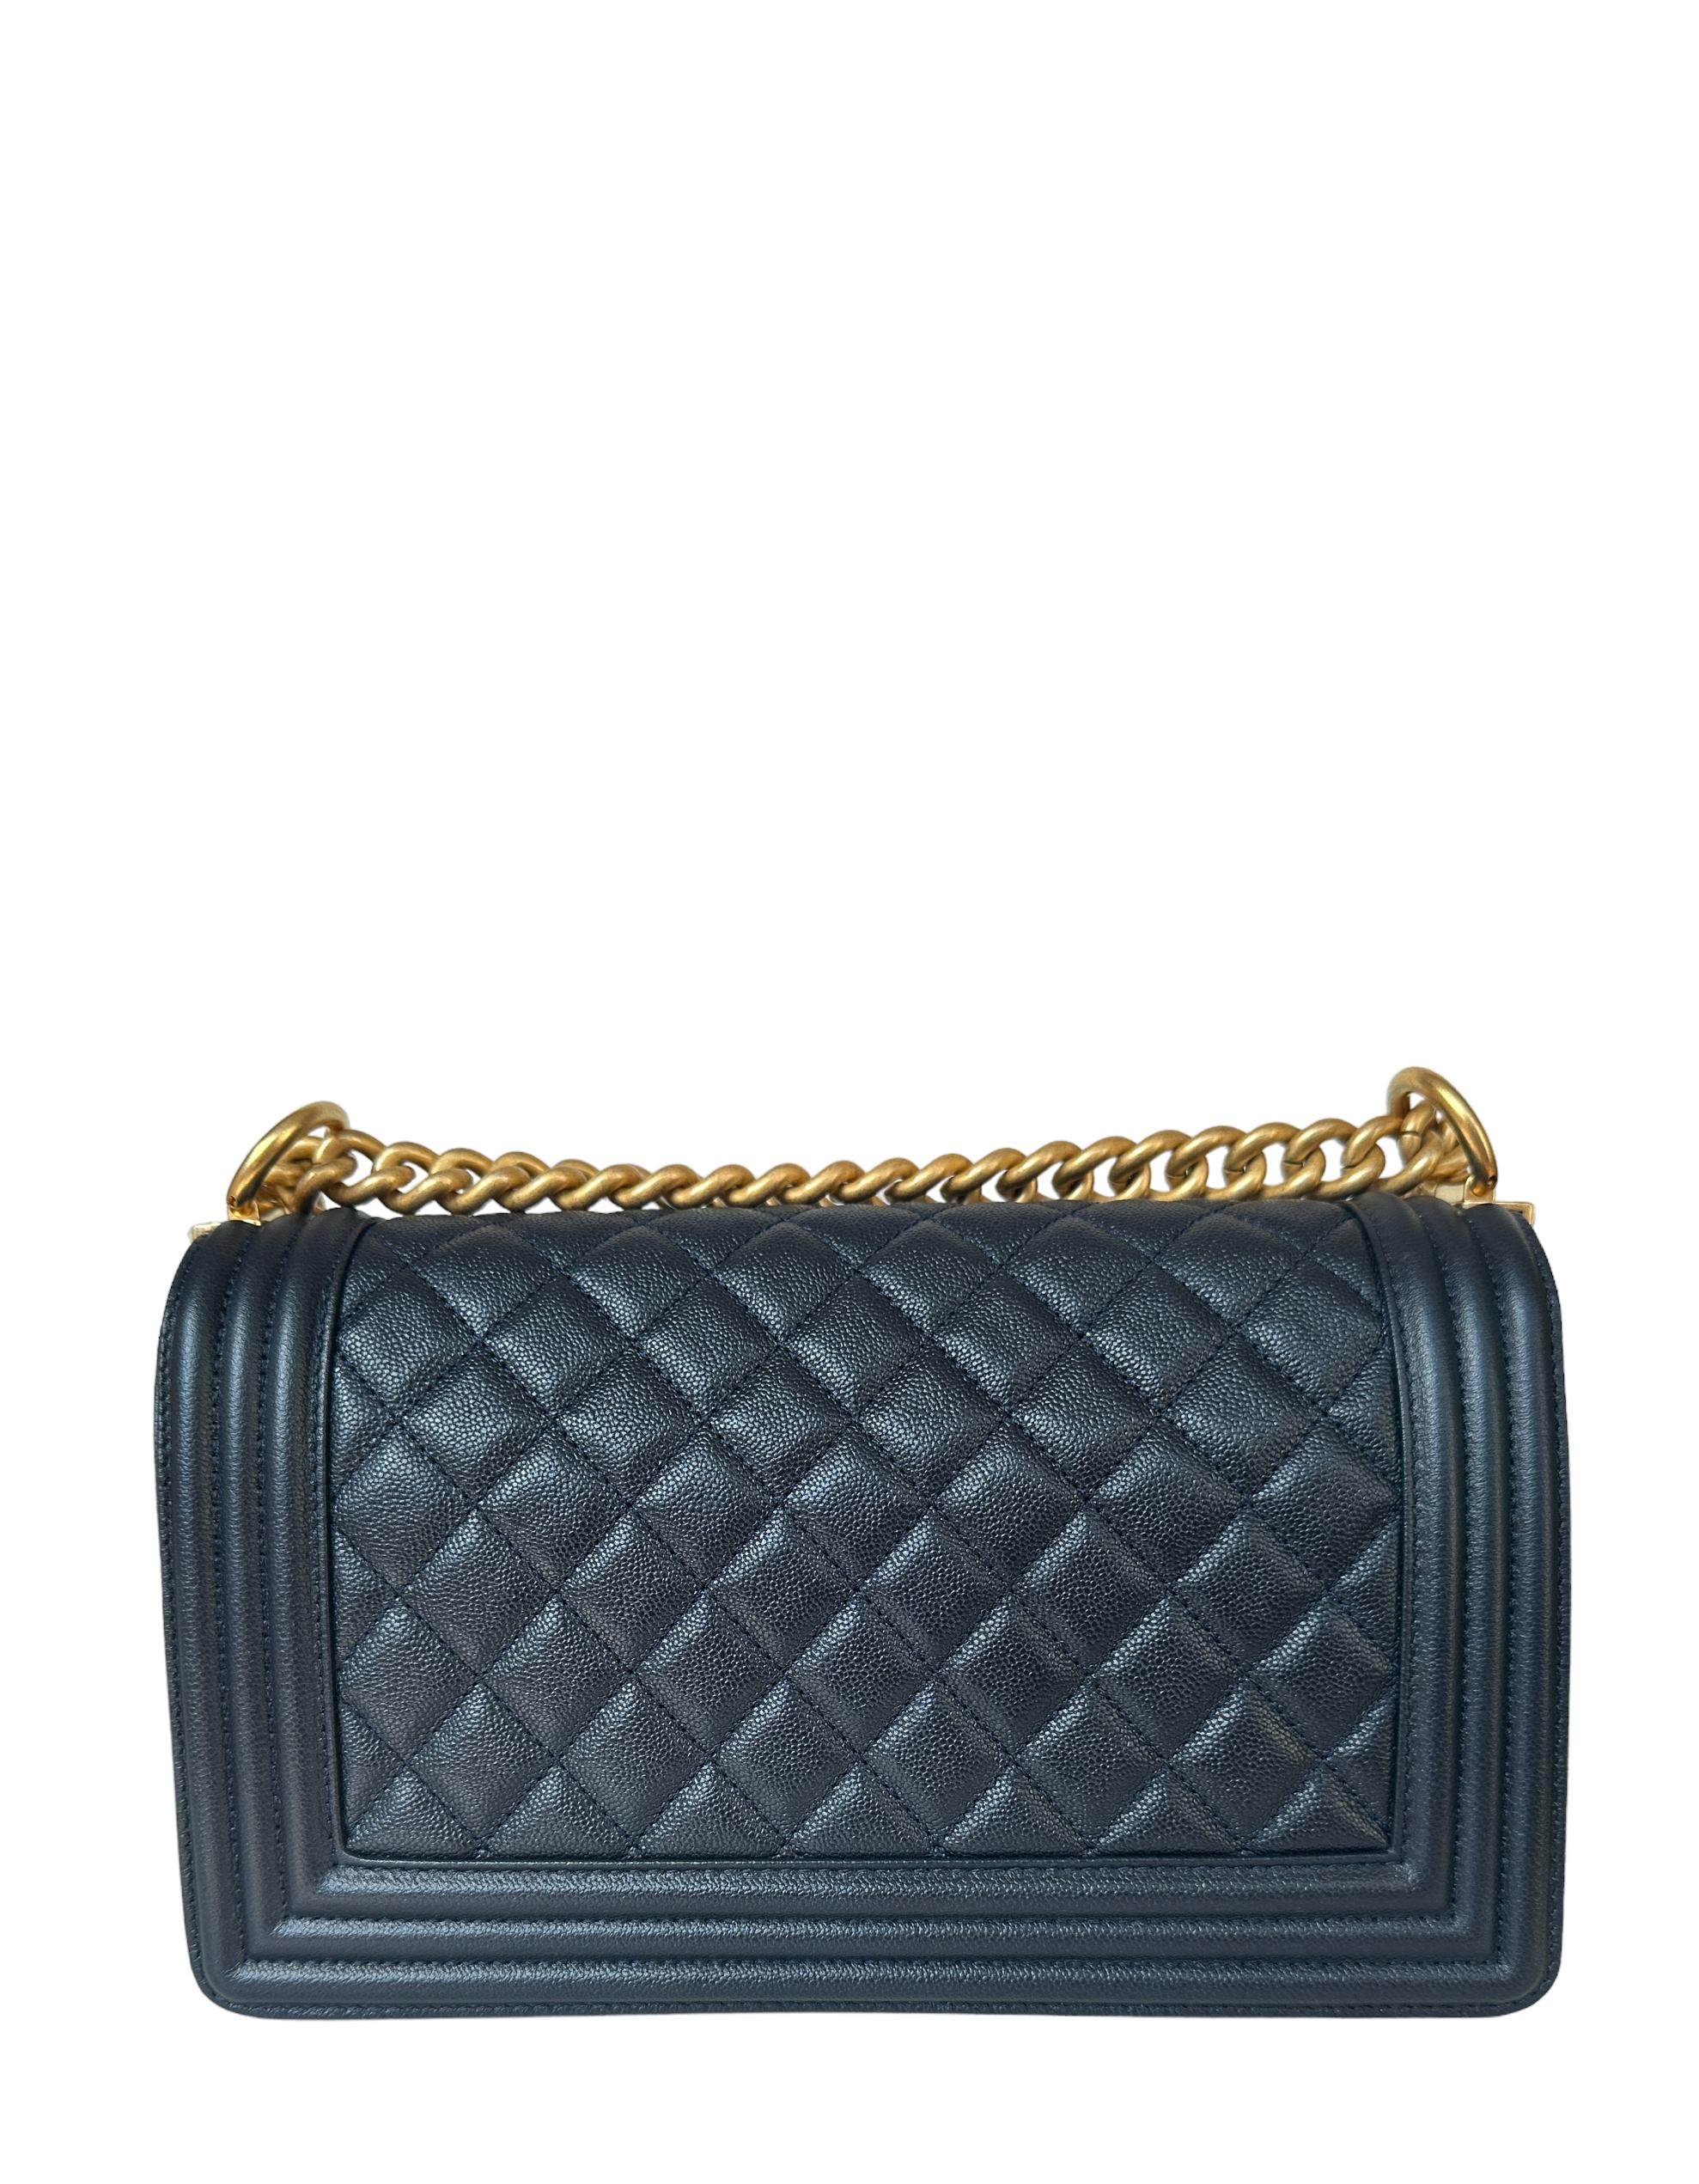 Black Chanel Metallic Navy Caviar Leather Quilted Medium Boy Bag For Sale